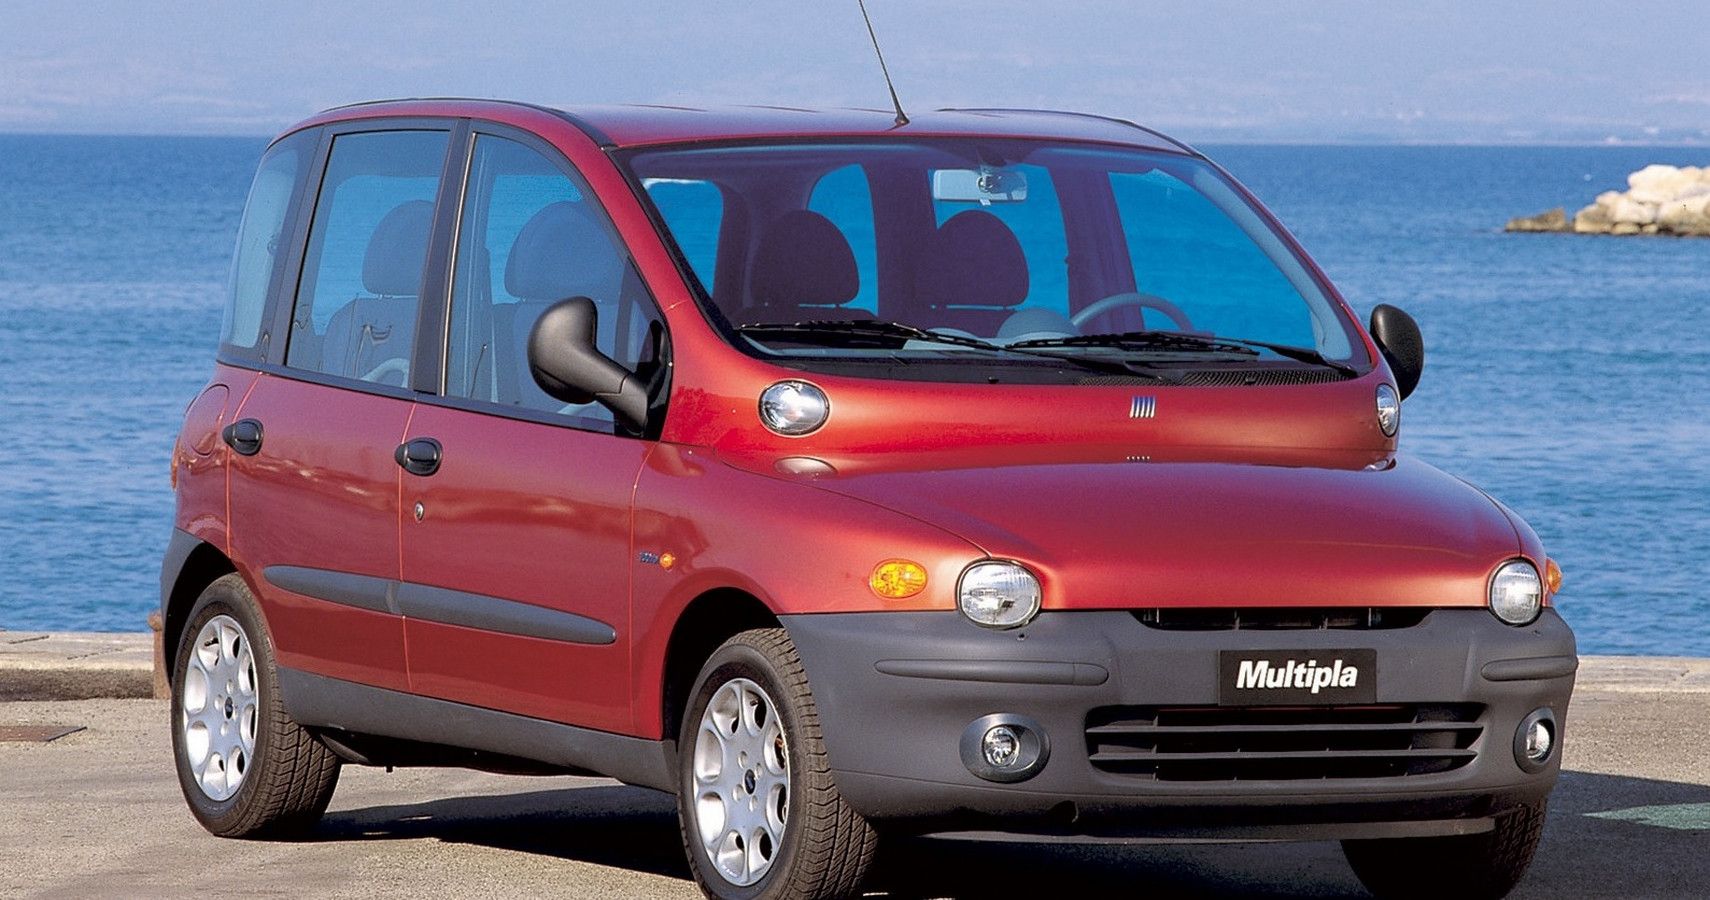 The front of a red 2006 fiat multipla